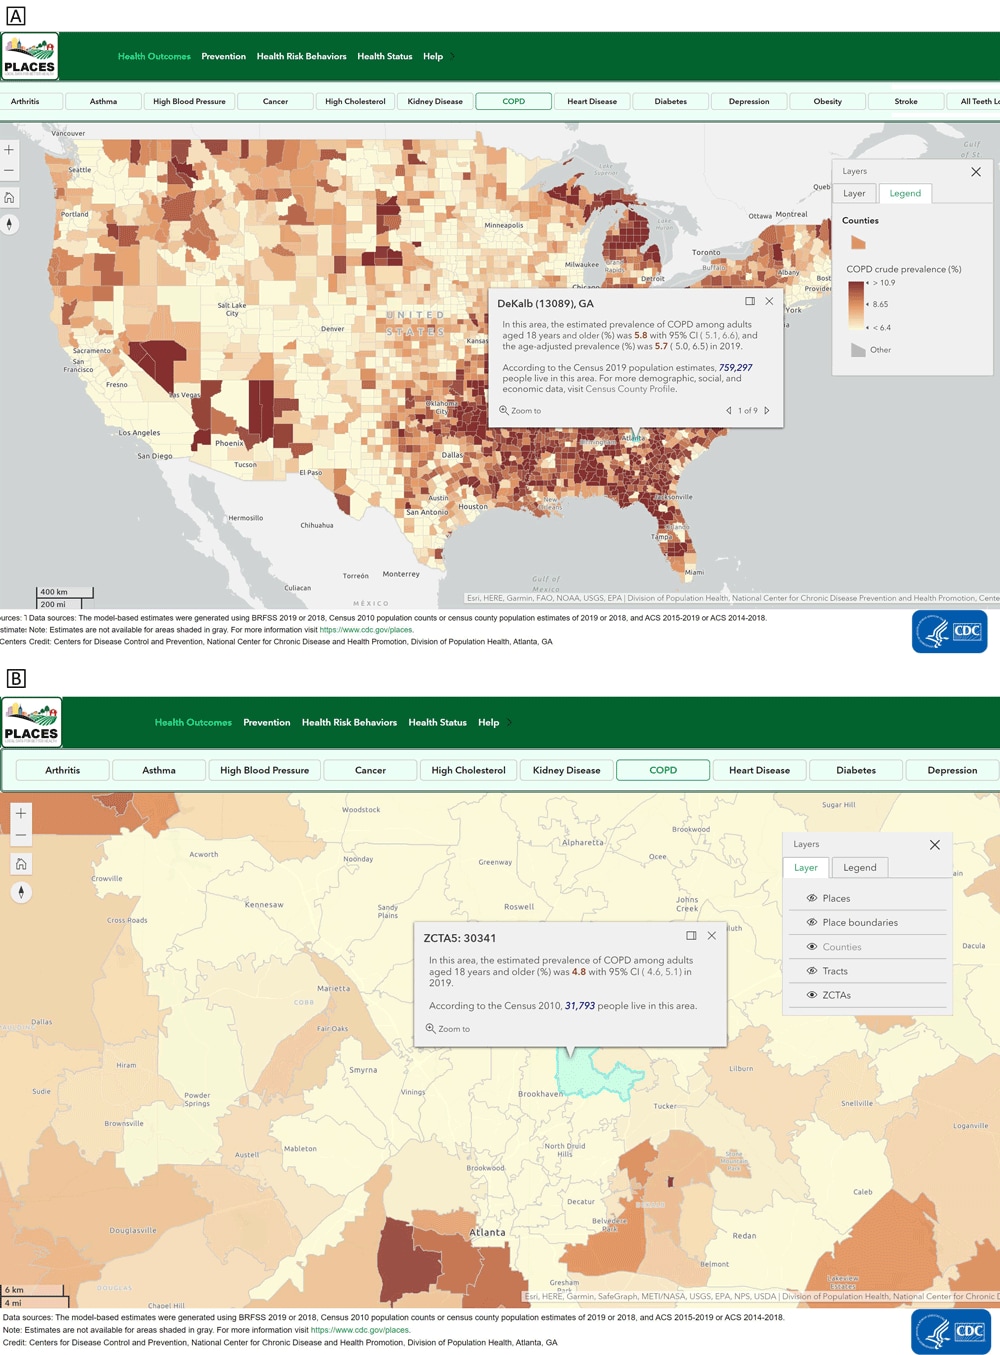 PLACES interactive map application (www.cdc.gov/PLACES). Users can examine and visualize health data estimates across different geographic levels by using the PLACES interactive mapping application. By clicking a specific location, the selected measure (eg, estimated prevalence and crude prevalence) will appear for the selected chronic disease at that location. By zooming in and clicking on a particular geographic area, users can view the estimate for smaller geographic units. In Figure 2A, the county-level prevalence of COPD in Dekalb County, Georgia, is shown. Figure 2B displays COPD prevalence estimates at the ZIP Code tabulation area (ZTCA), which can be discerned by looking at the layer tool. Abbreviations: COPD, chronic obstructive pulmonary disease; PLACES, Population Level Analysis and Community EStimates.